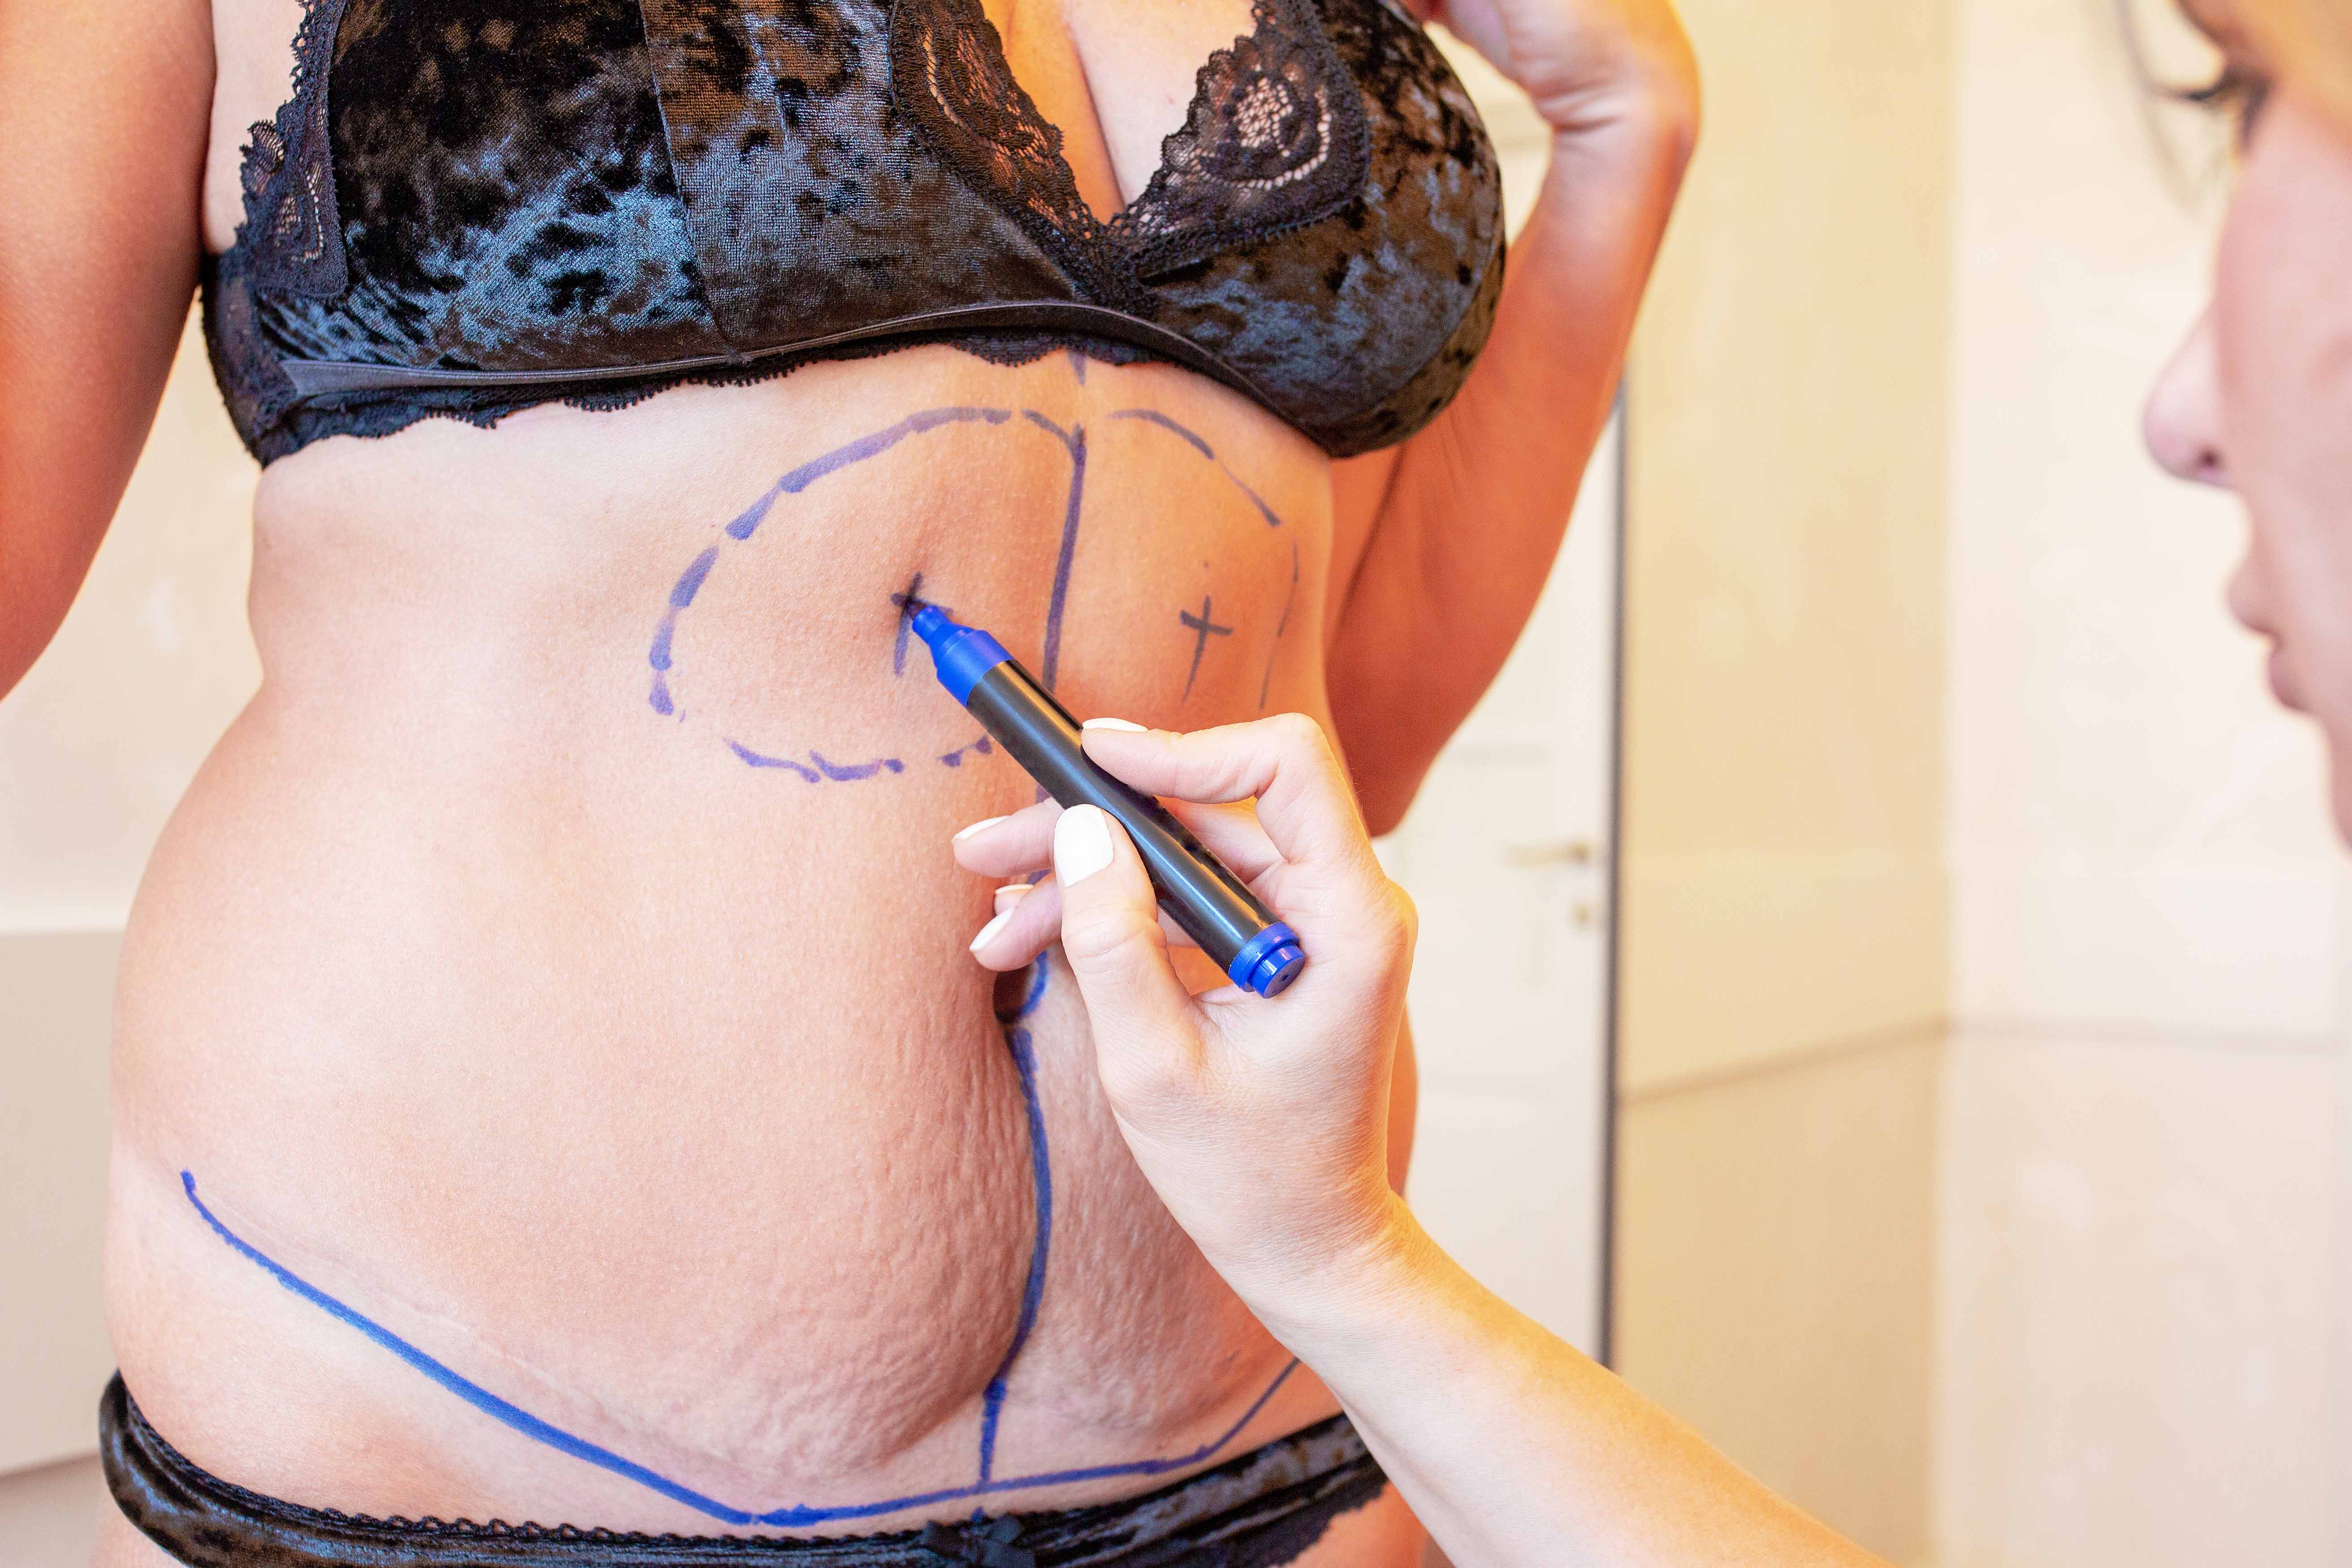 Liposuction: Debunking the common myths